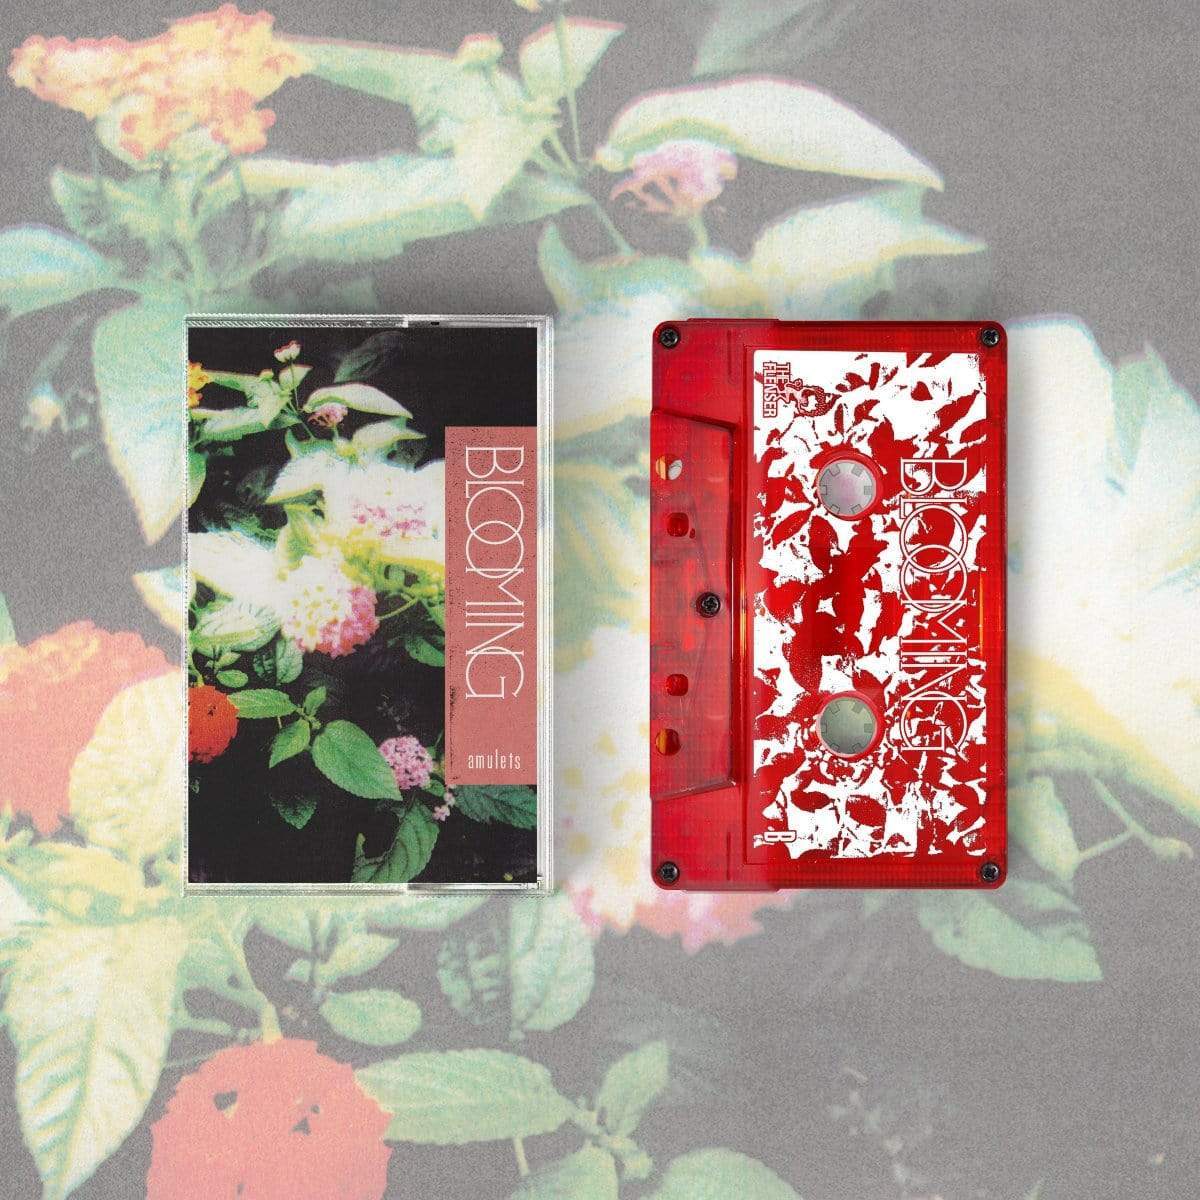 The Flenser Tapes Amulets &quot;Blooming&quot; Tape